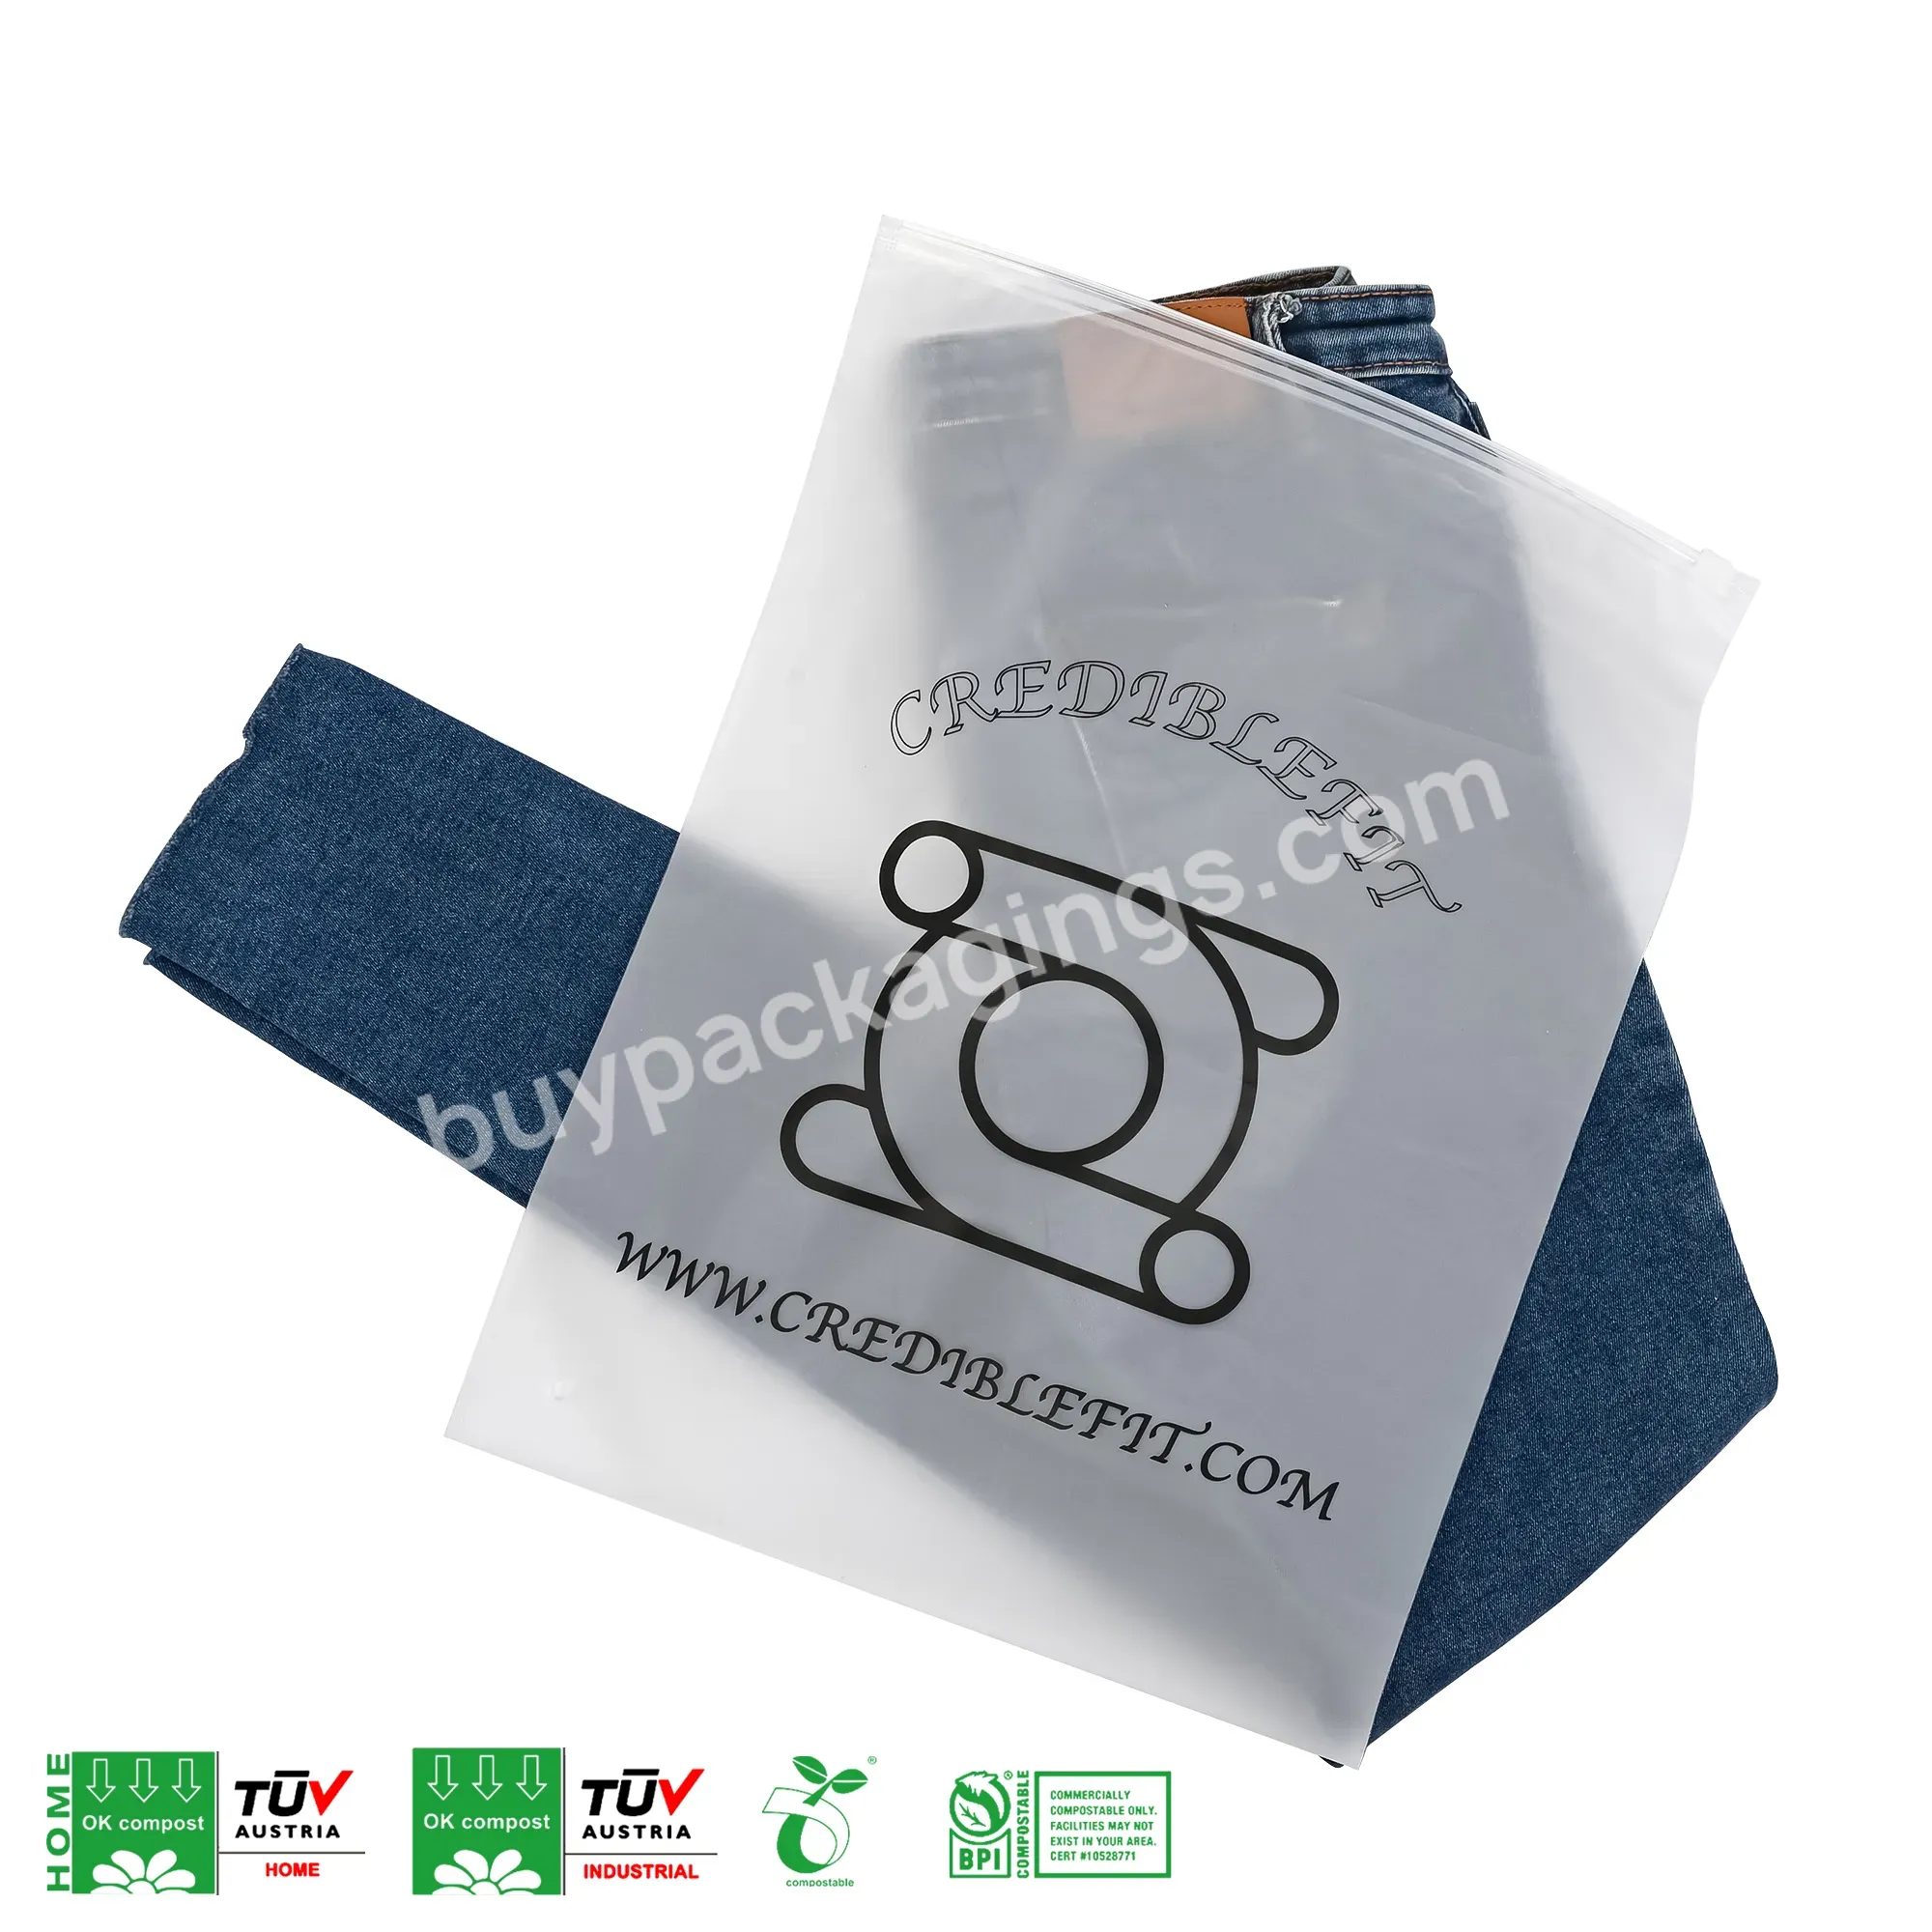 Hot Sale Zip Lock Bags Mini Durable Zipper Bags Frosted Reusable Ziplock Bags For Clothing Packaging - Buy Zip Lock Bags Mini,Zipper Bags For Clothing Packaging,Reusable Ziplock Bags.